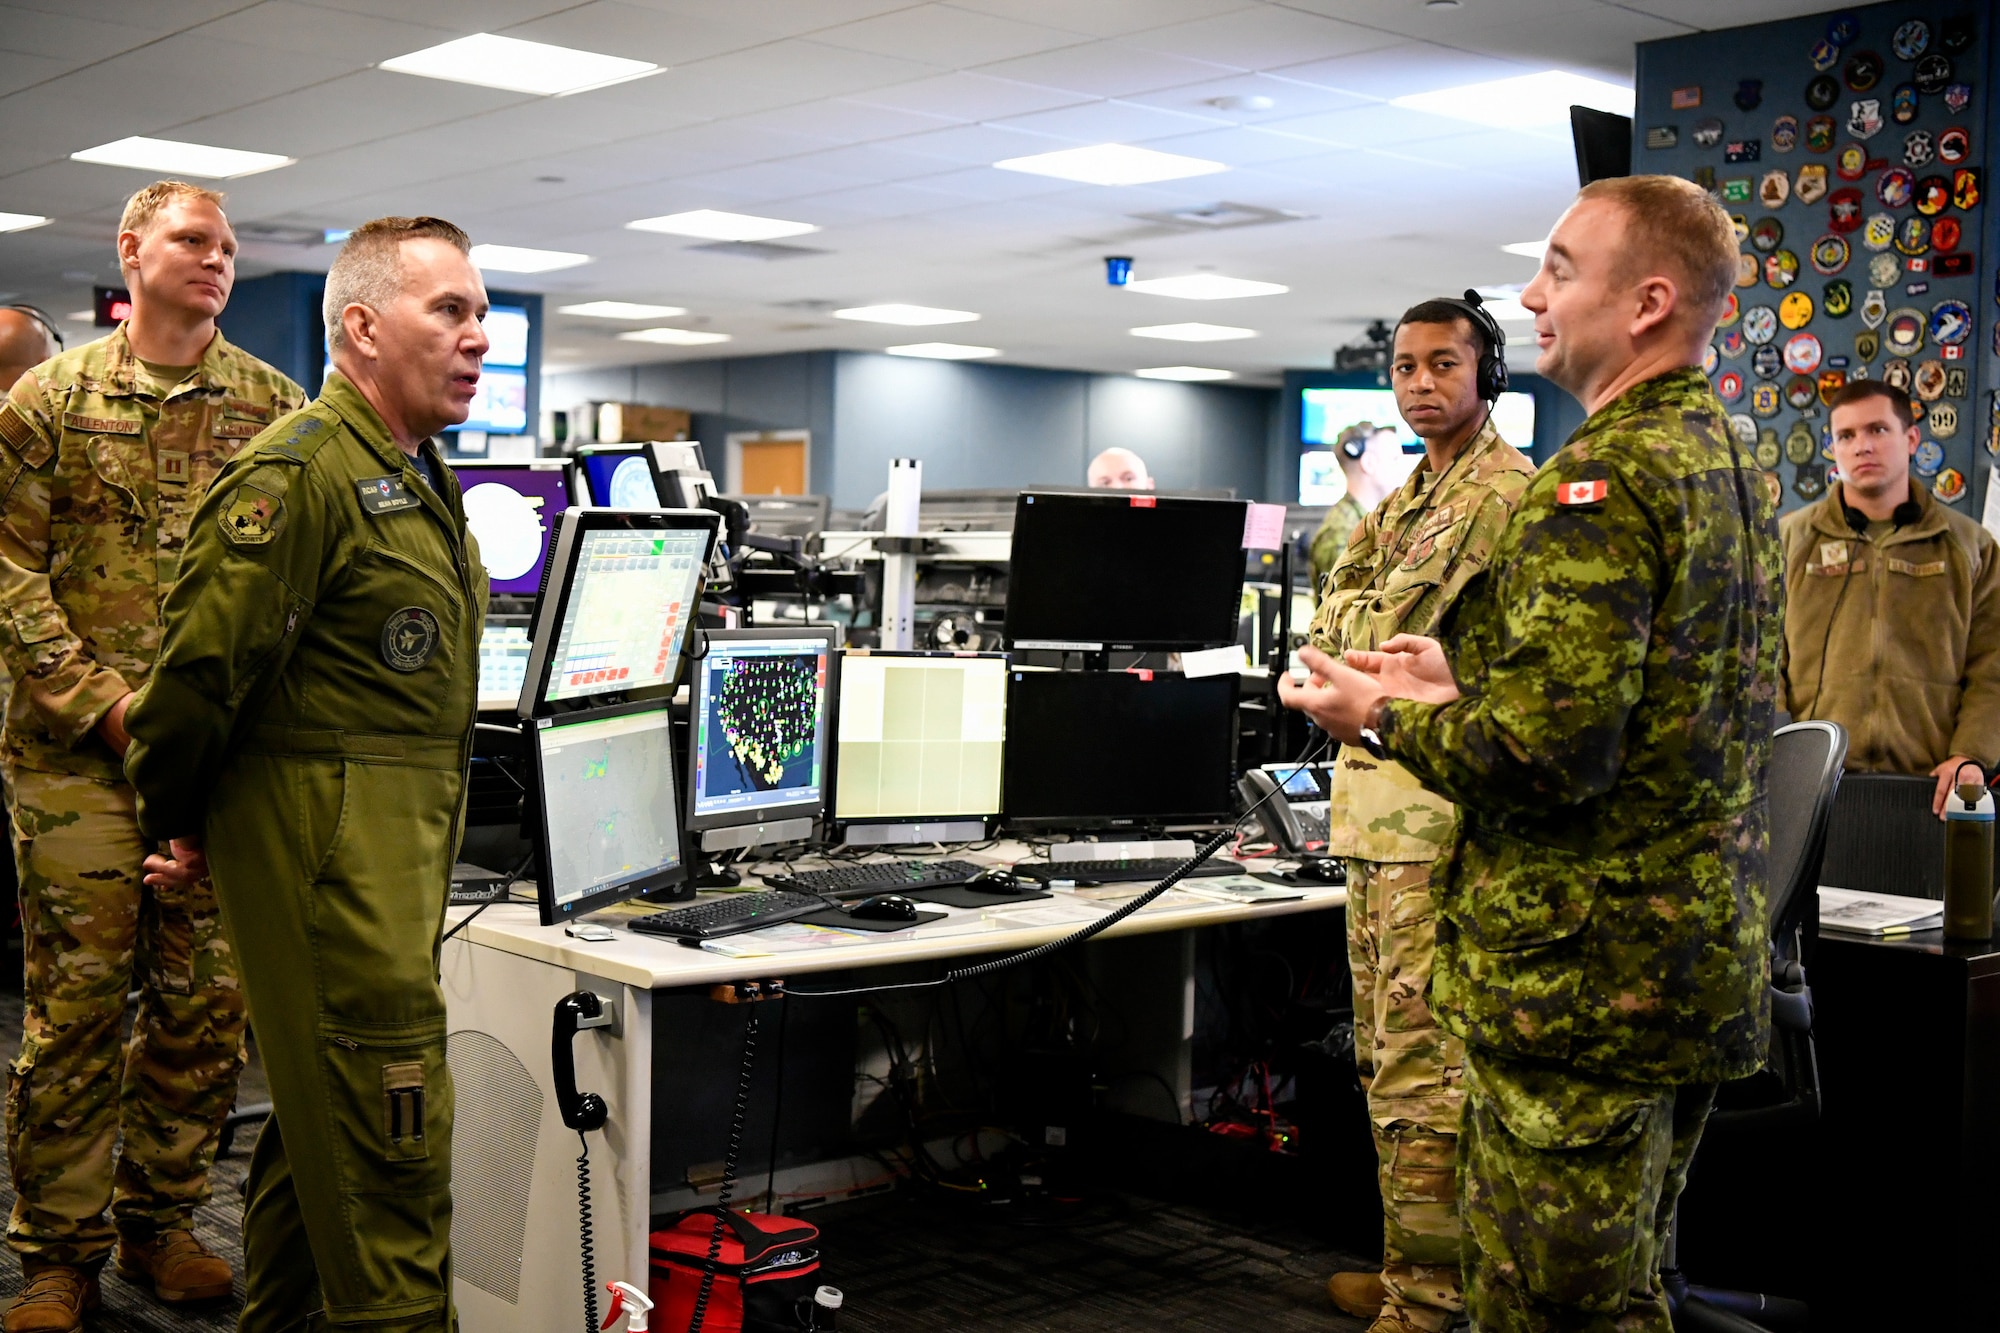 General is briefed on the operations floor